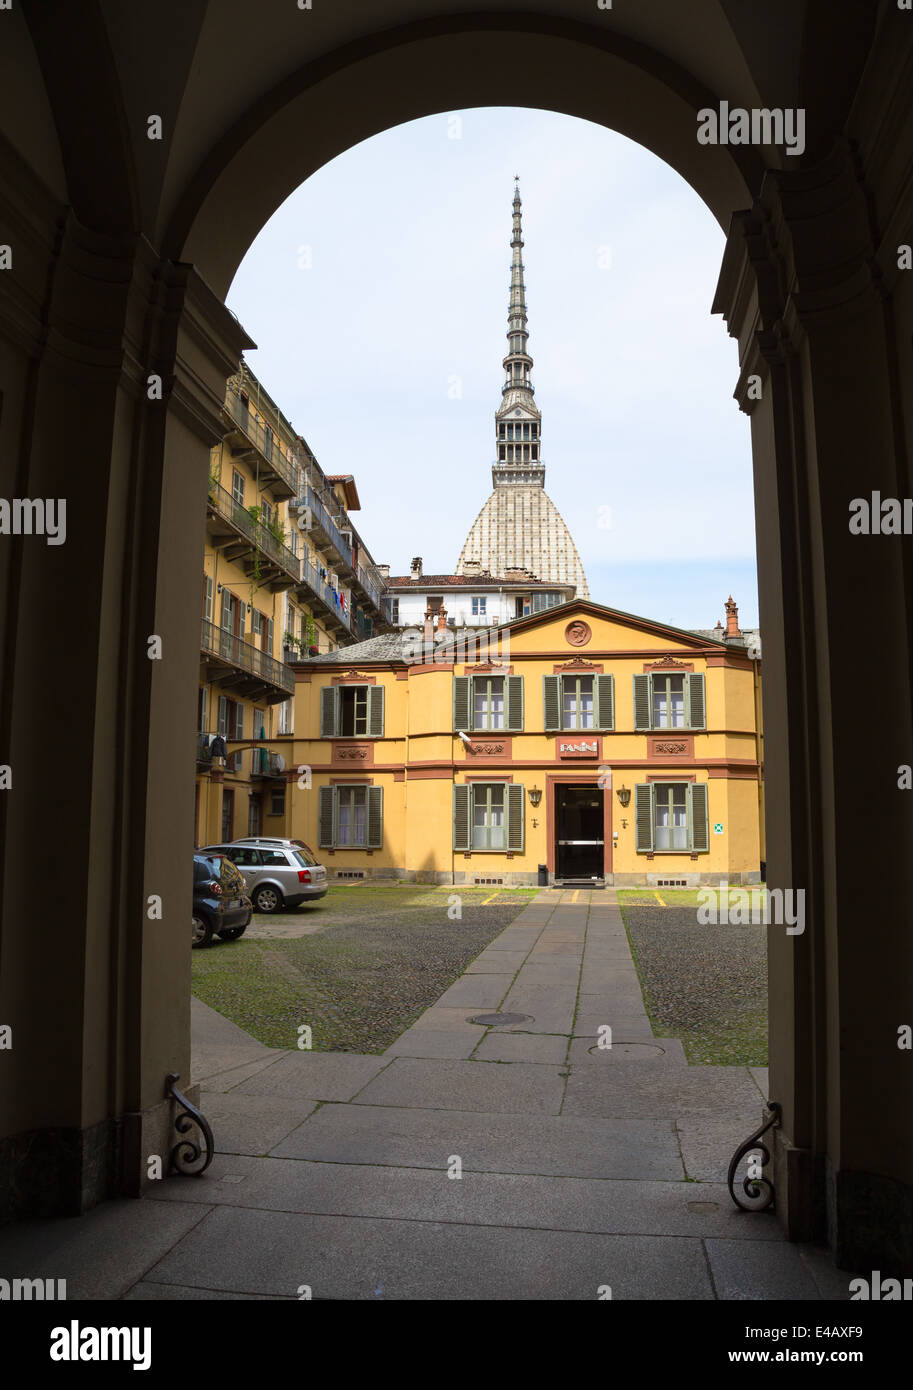 Spire of the Mole Antonelliana, framed by an archway on the Via Po, Turin, Italy. Stock Photo